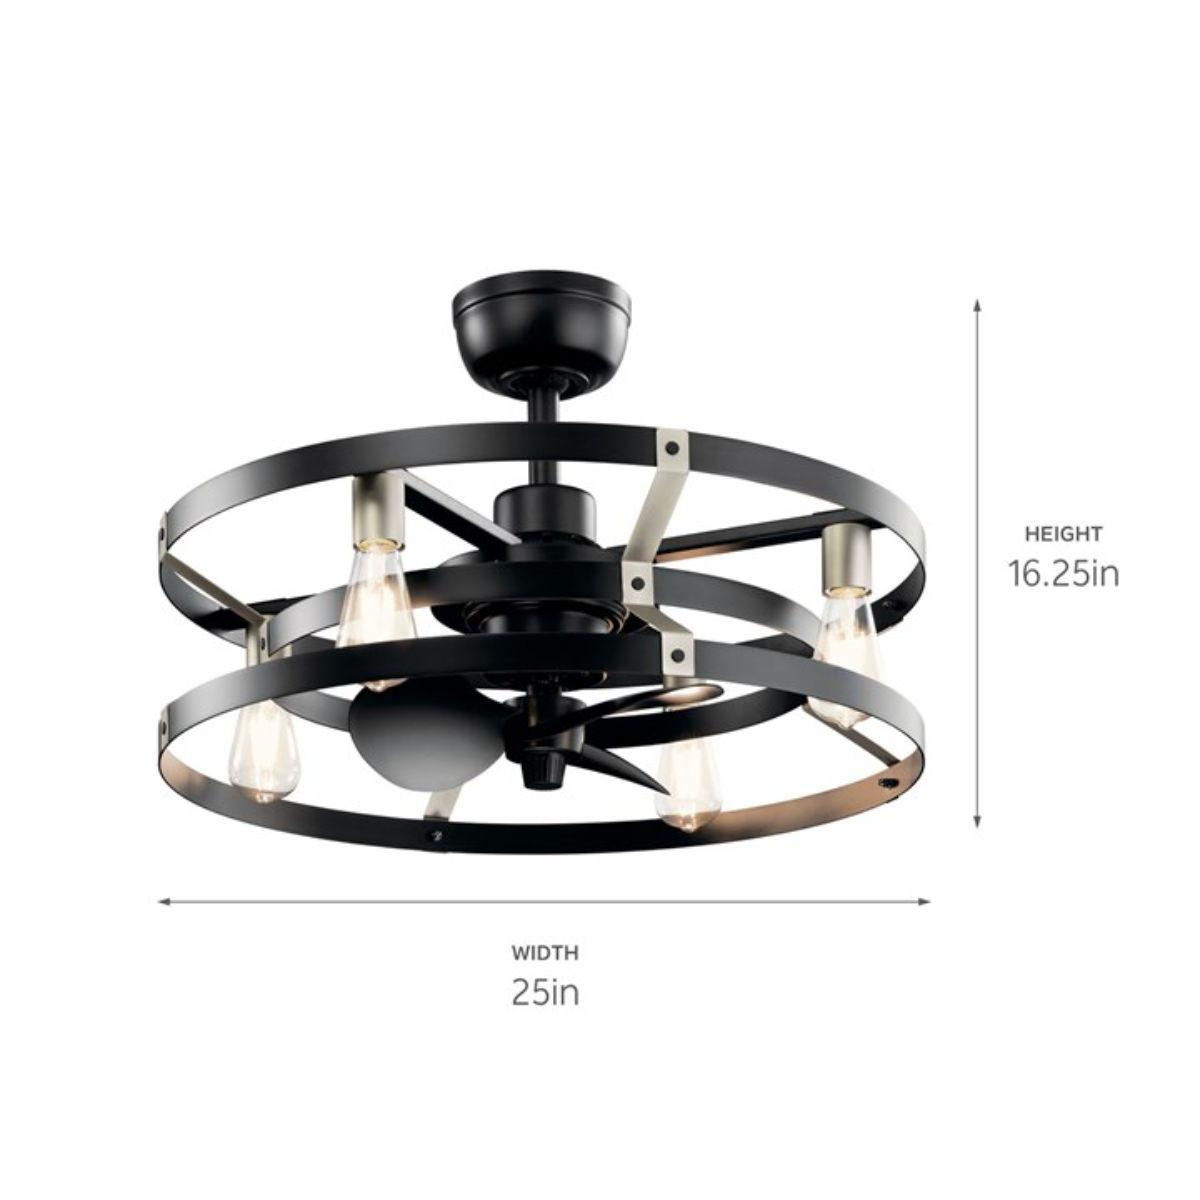 Cavelli 25 Inch Modern Chandelier Ceiling Fan With Light, Wall Control Included